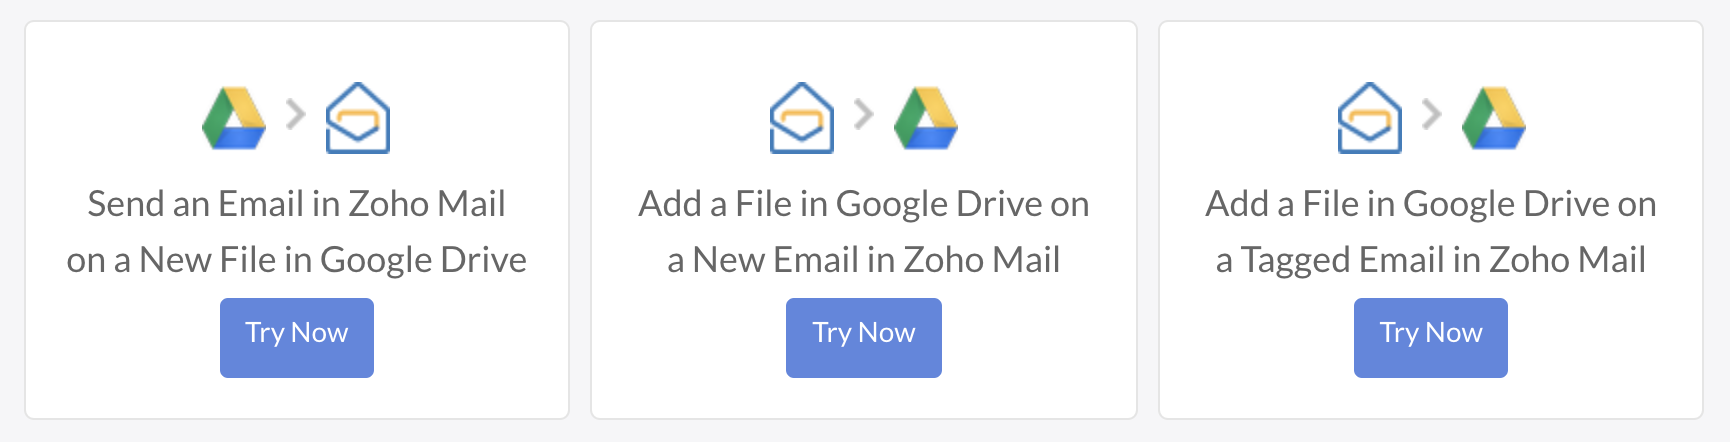 Google Apps connector for Zoho Mail